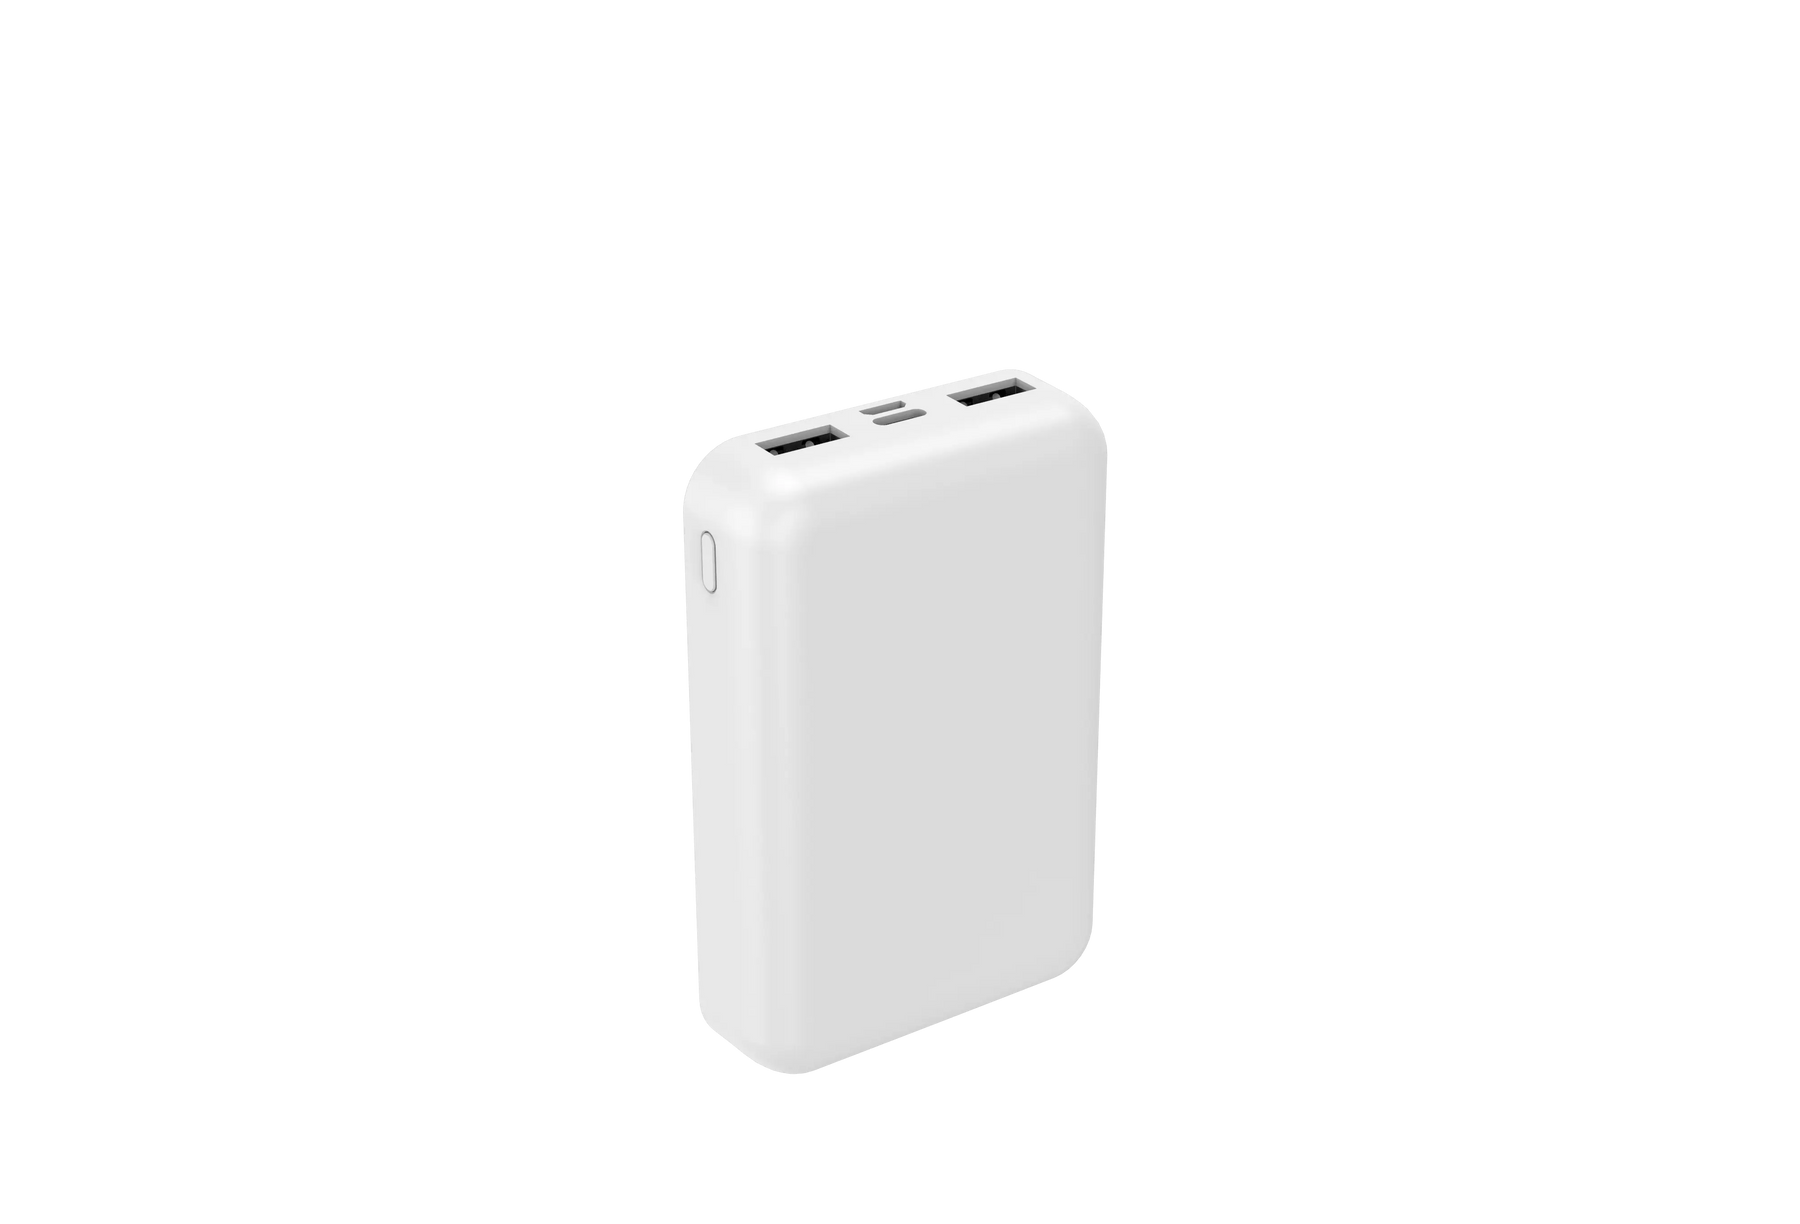 10K mAh Power Bank - Two type A ports and One type C